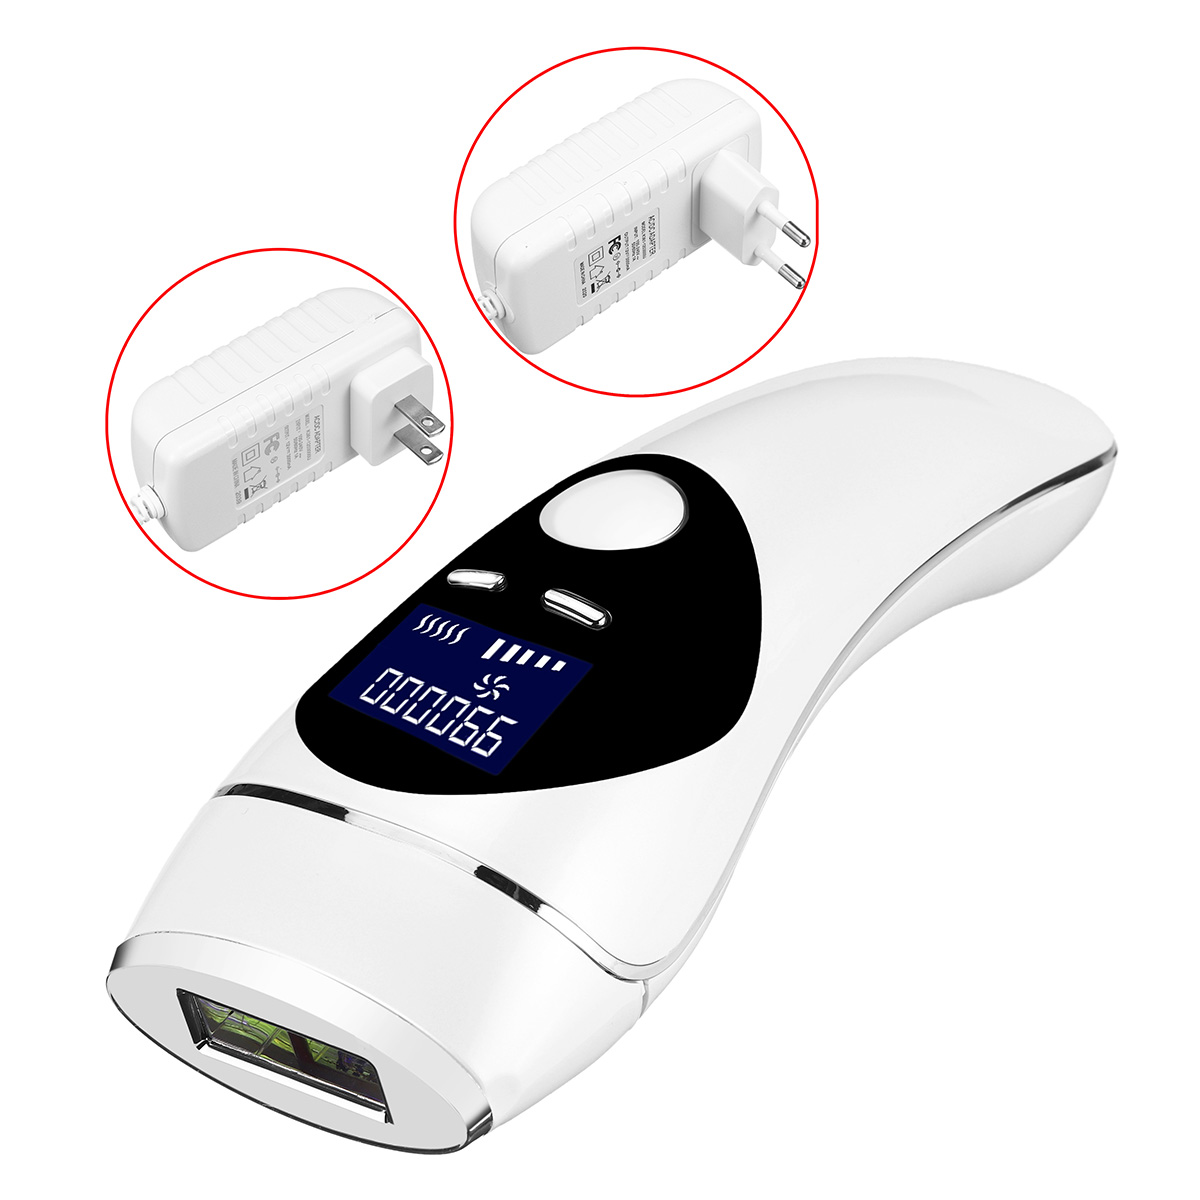 999999-Flashes-DIY-IPL-Laser-Hair-Removal-Device-5-Levels-Painless-Epilator-Hair-Remover-1837621-1